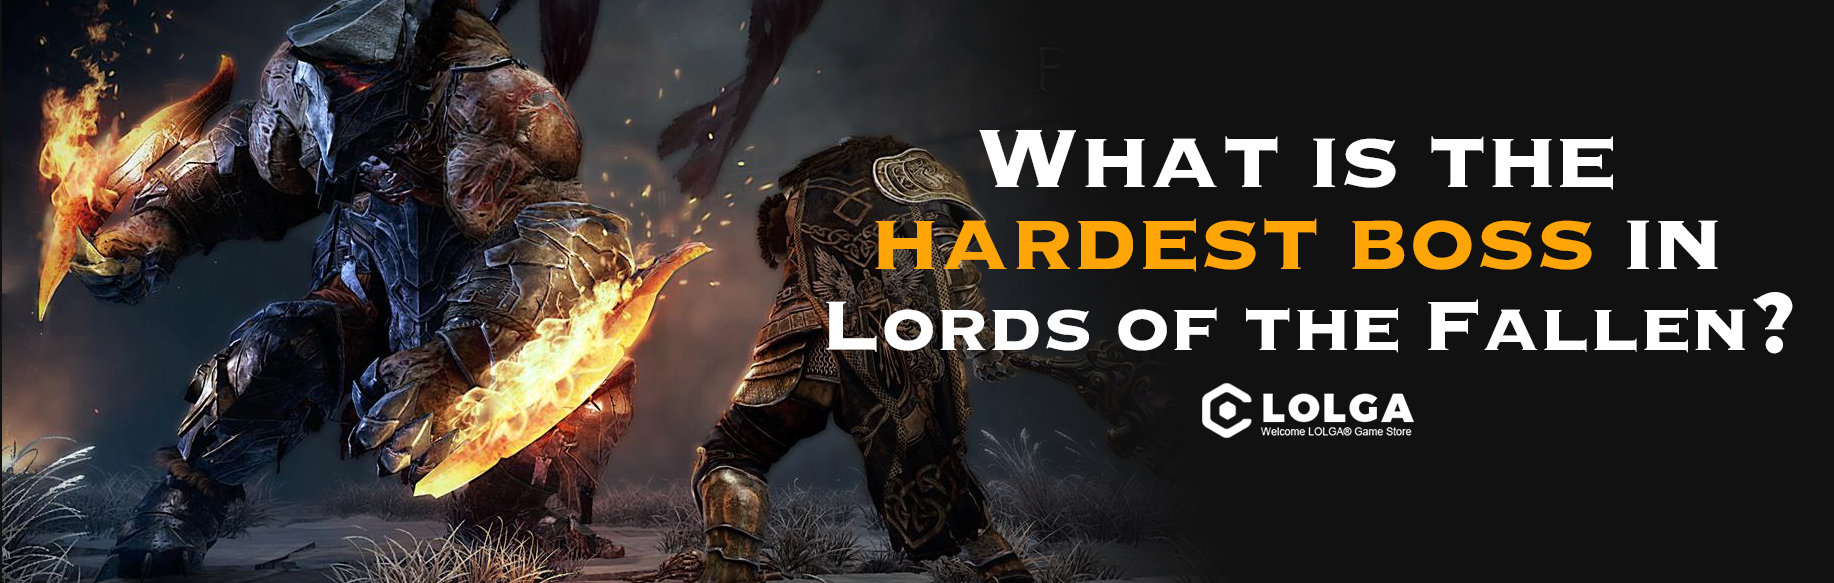 What is the hardest boss in Lords of the Fallen?